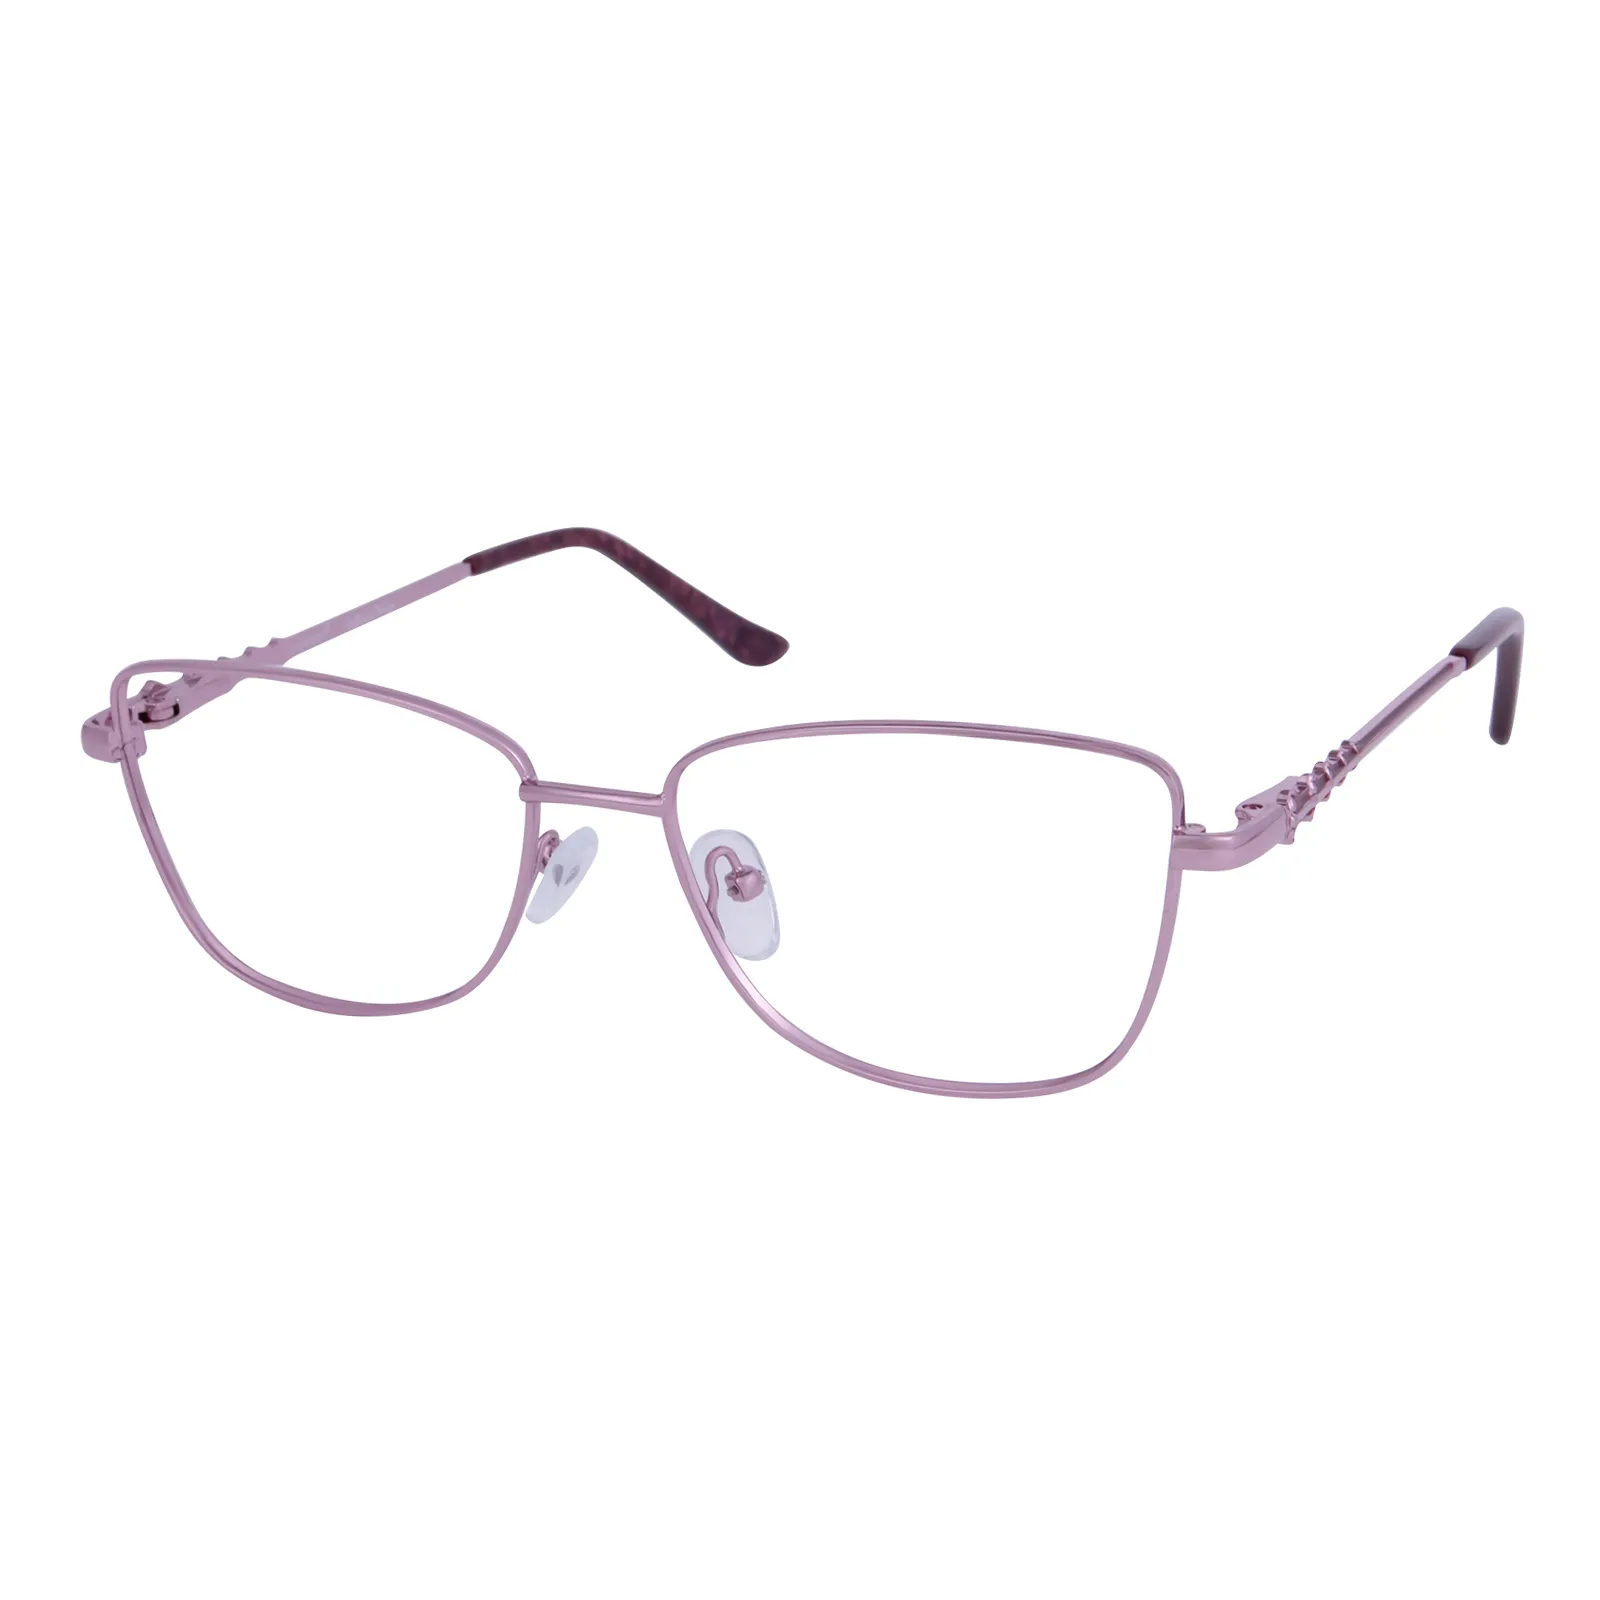 Alma - Rectangle Pink Glasses for Women